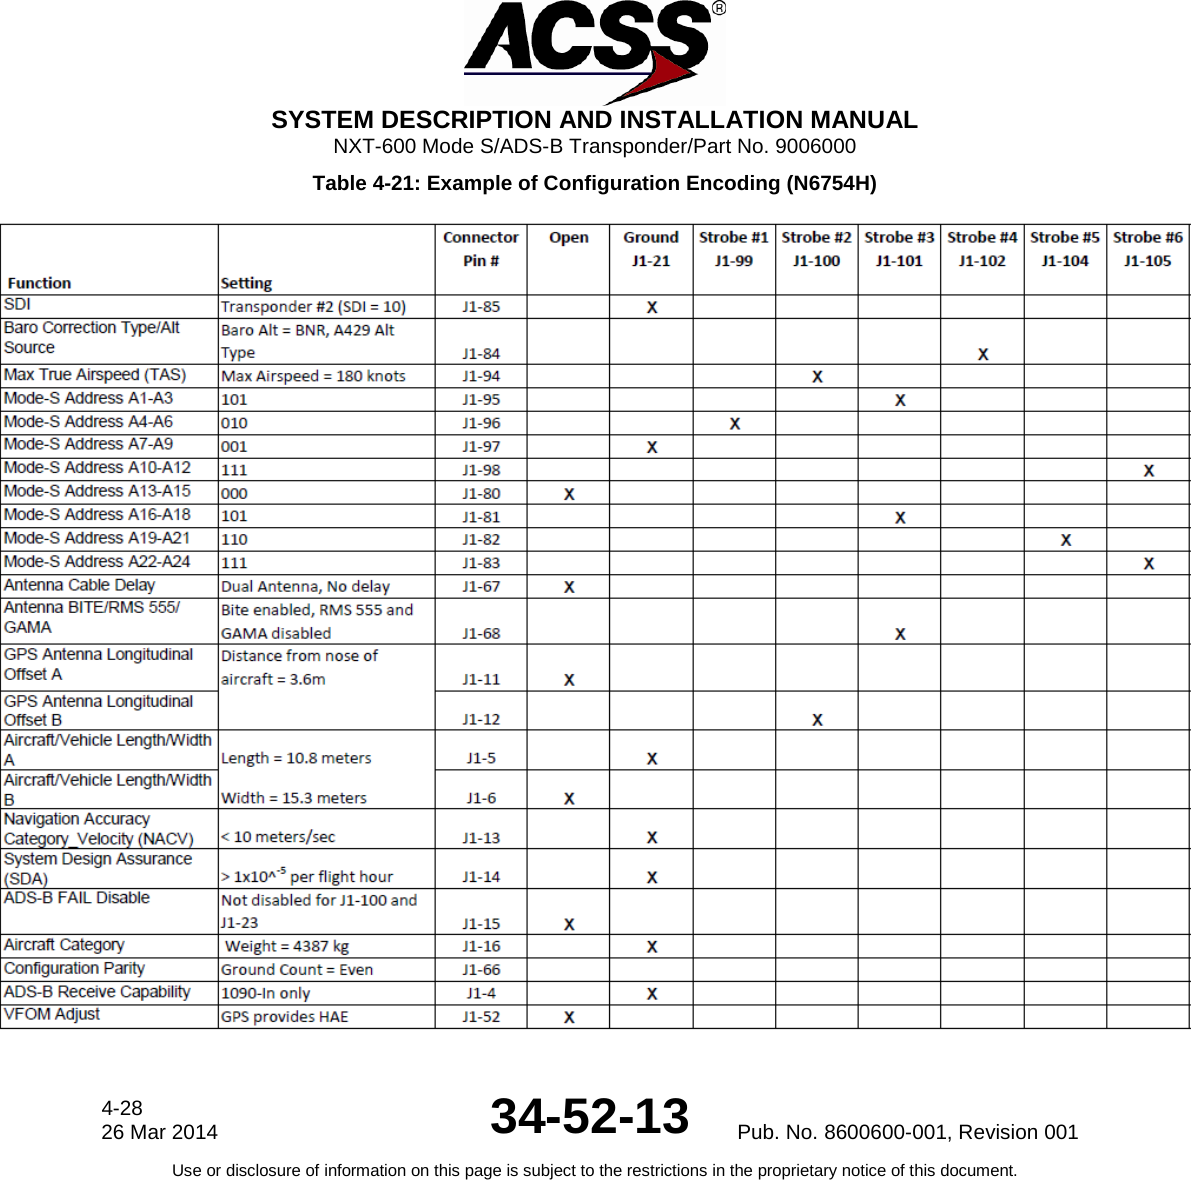  SYSTEM DESCRIPTION AND INSTALLATION MANUAL NXT-600 Mode S/ADS-B Transponder/Part No. 9006000 Table 4-21: Example of Configuration Encoding (N6754H) 4-28 26 Mar 2014 34-52-13 Pub. No. 8600600-001, Revision 001 Use or disclosure of information on this page is subject to the restrictions in the proprietary notice of this document.  